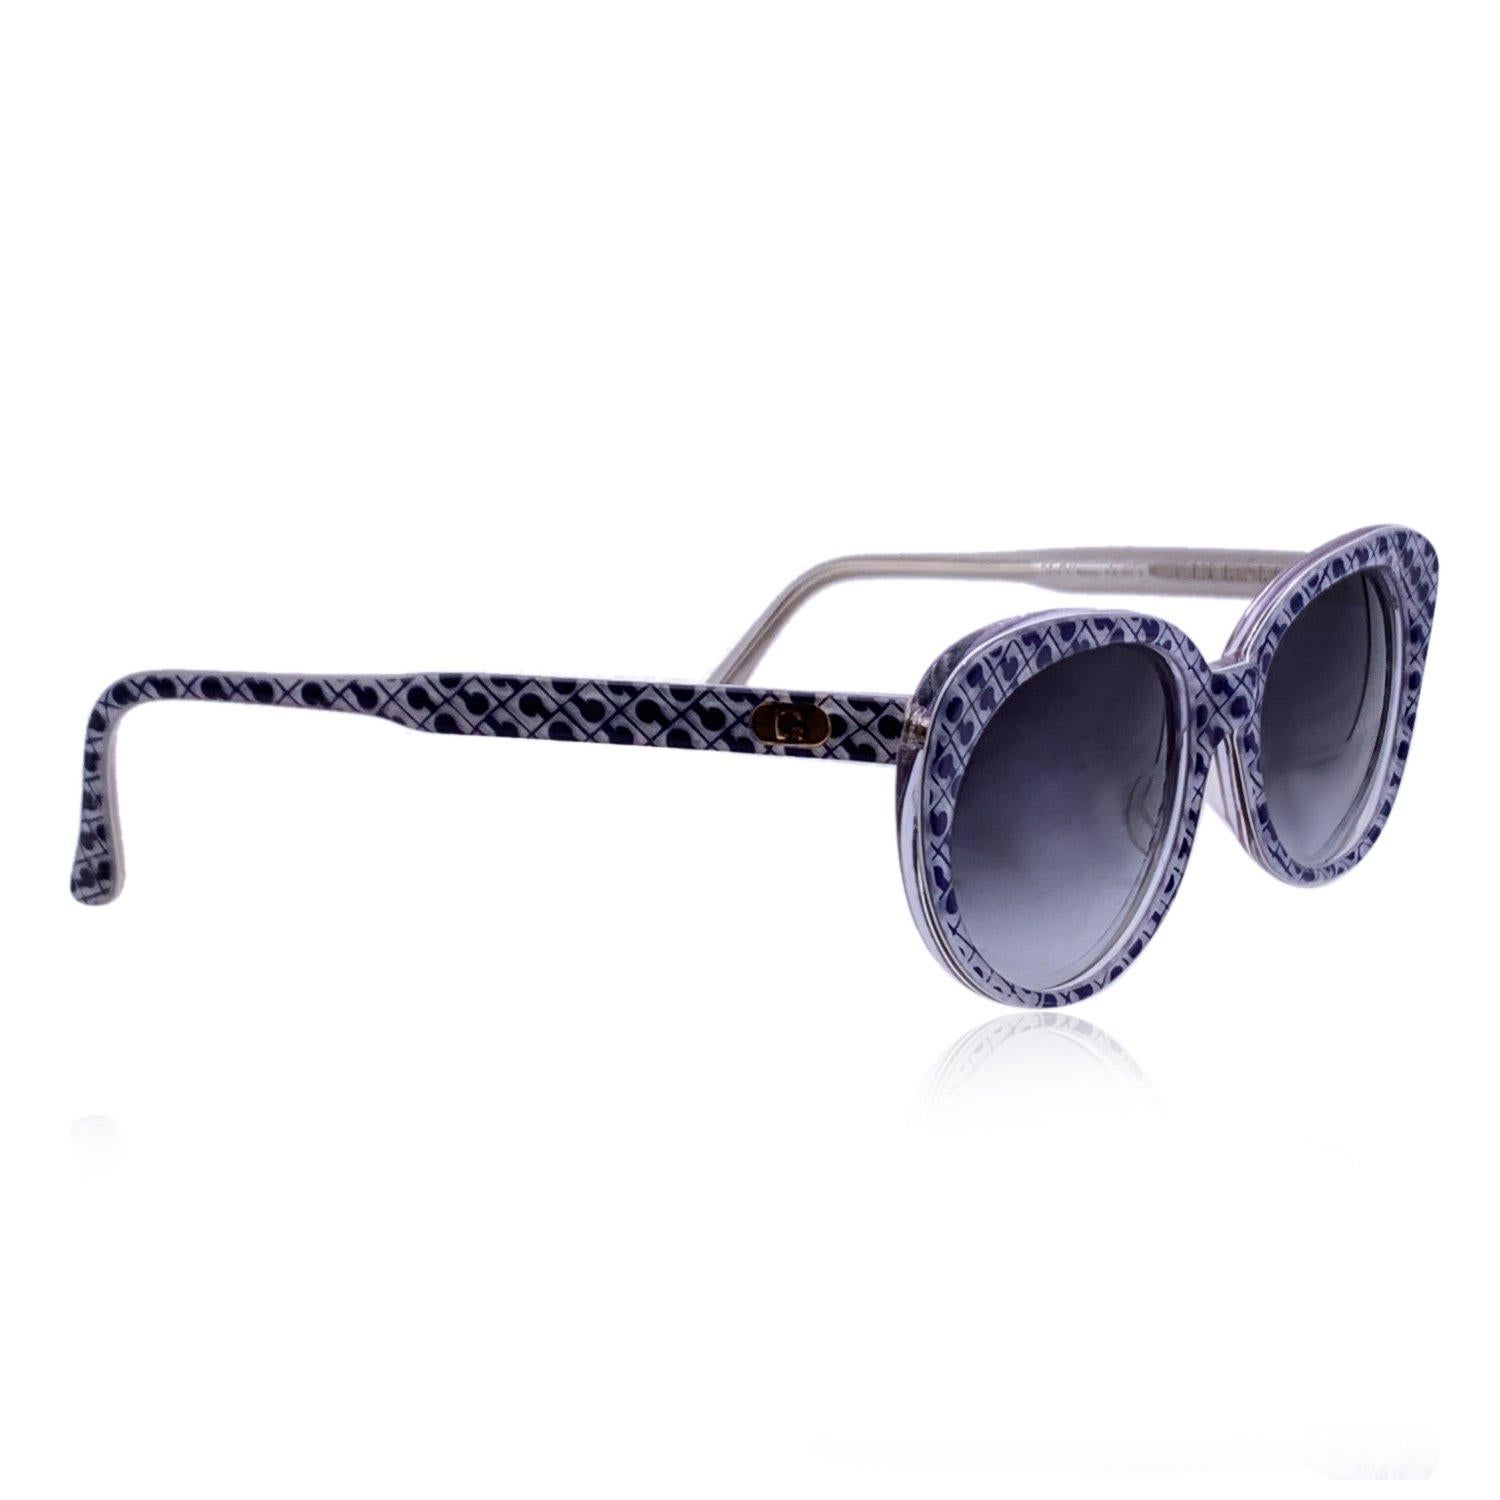 Vintage Gherardini sunglasses mod. Bleu - G/1. White and Blue acetate frame with logo pattern. Original 100% Total UVA/UVB protection in gradient grey color. Gherardini logo on temples. Made in Italy Details MATERIAL: Acetate COLOR: Grey MODEL: